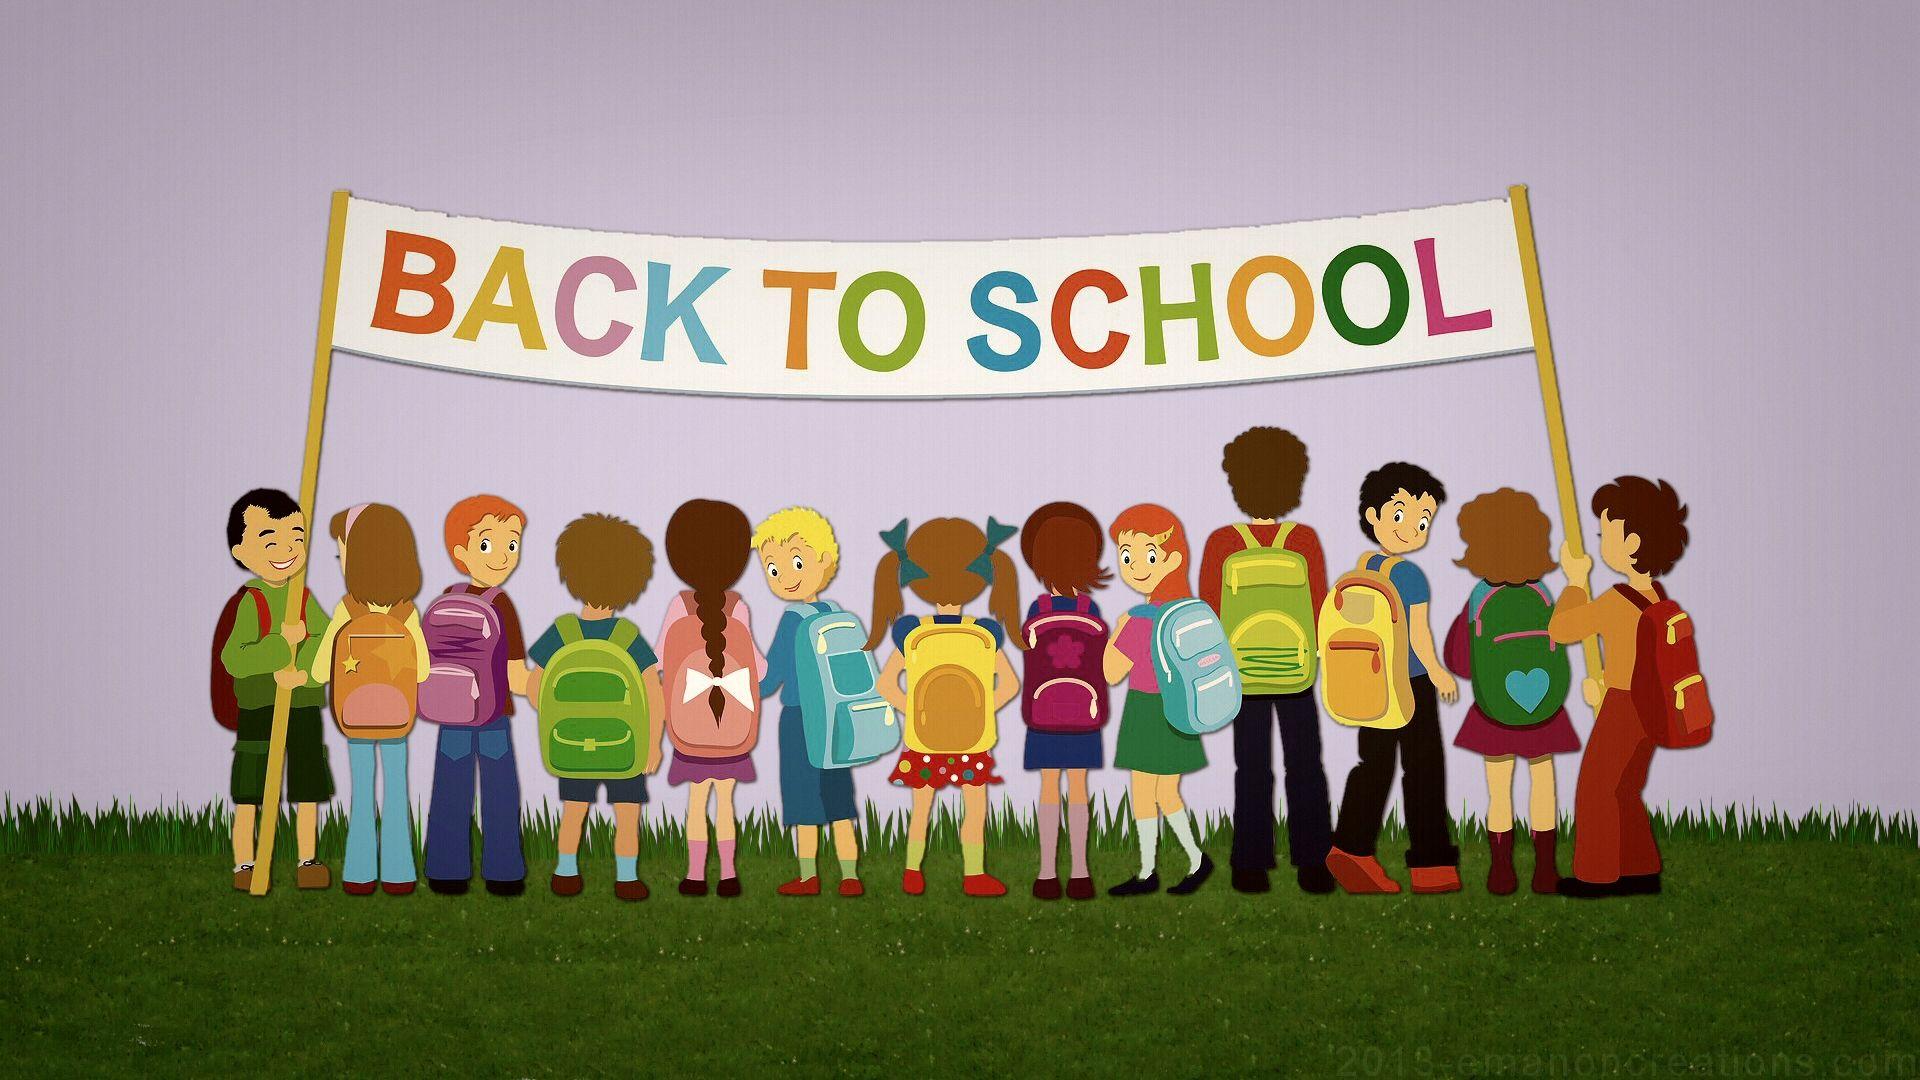 Wallpaper.wiki Cool Back To School 1920x1080 PIC WPC001545